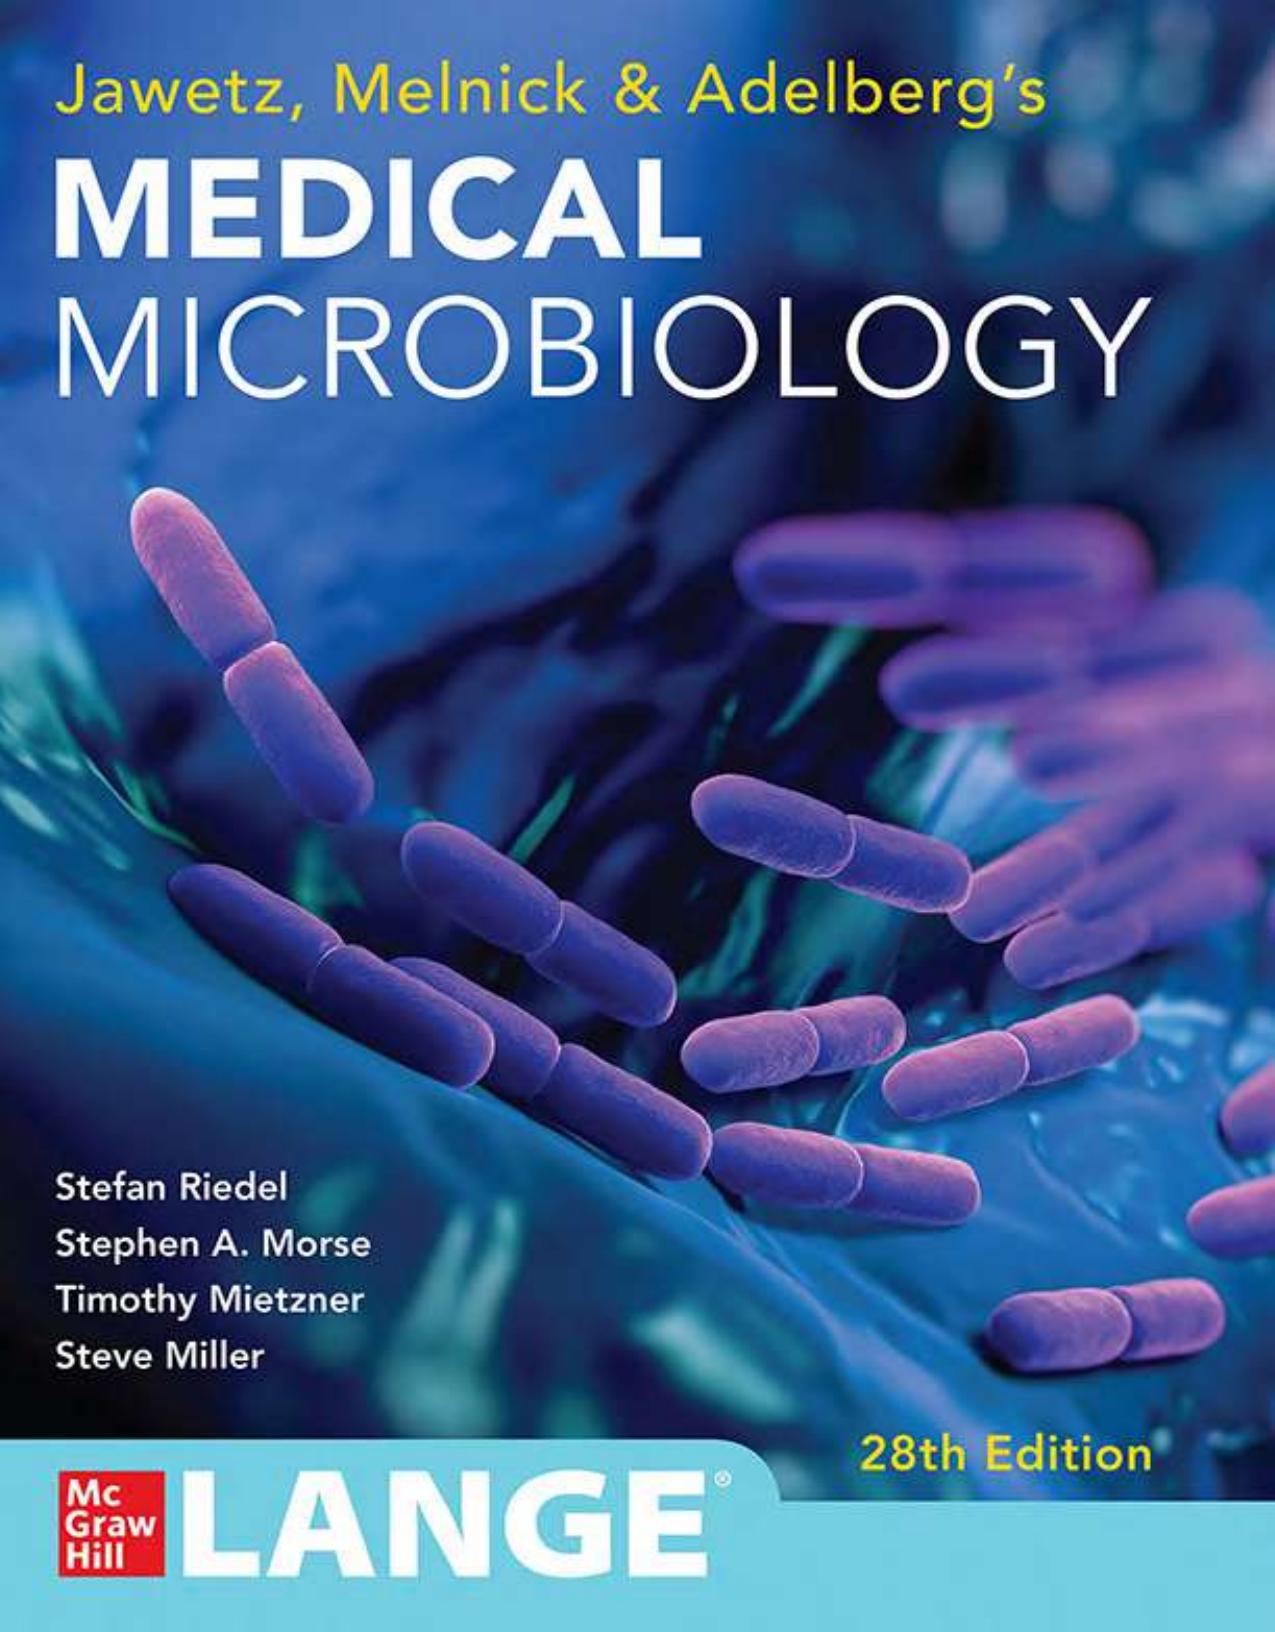 Medical Microbiology 28th ed Stefan Riedel, Stephen Morse, Timothy Mietzner,  (2019)